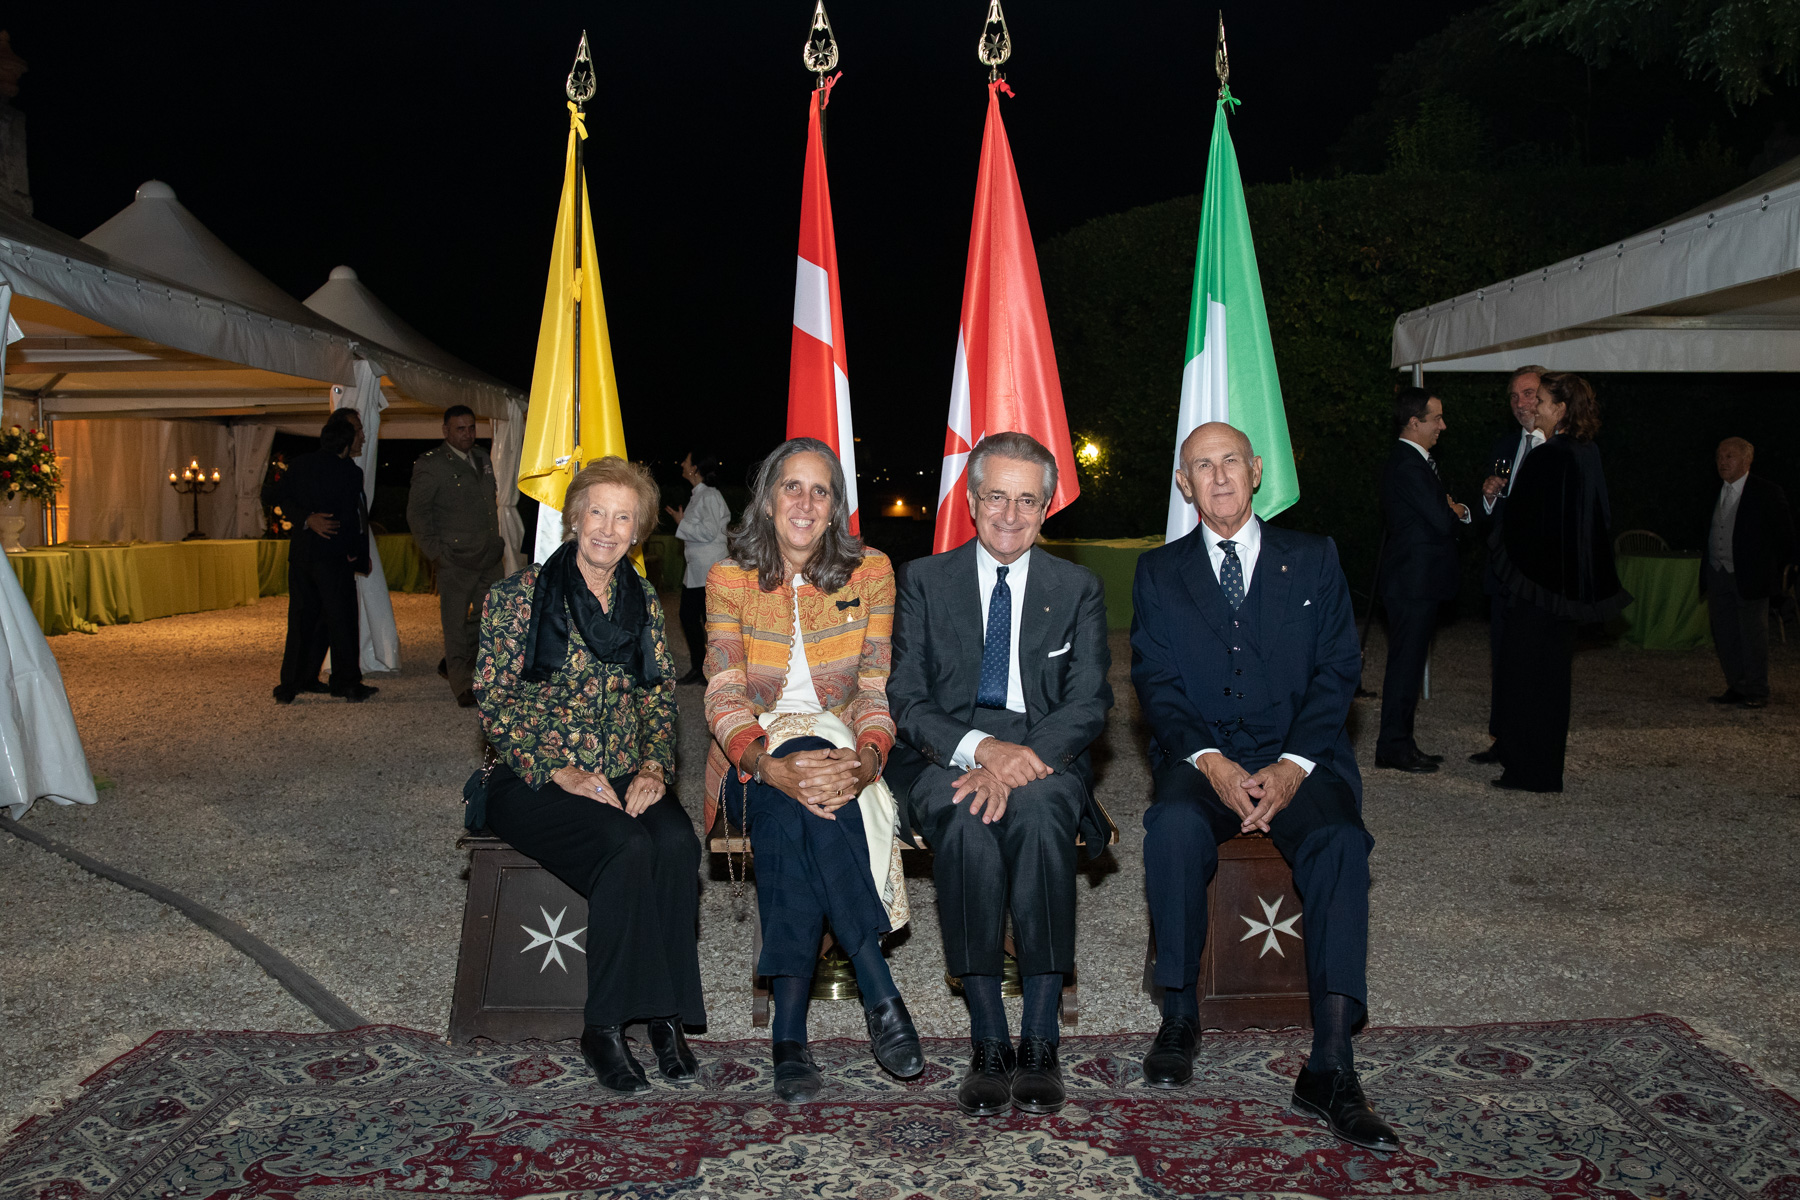 Joint Reception of the Embassies to the Holy See and to the Quirinale